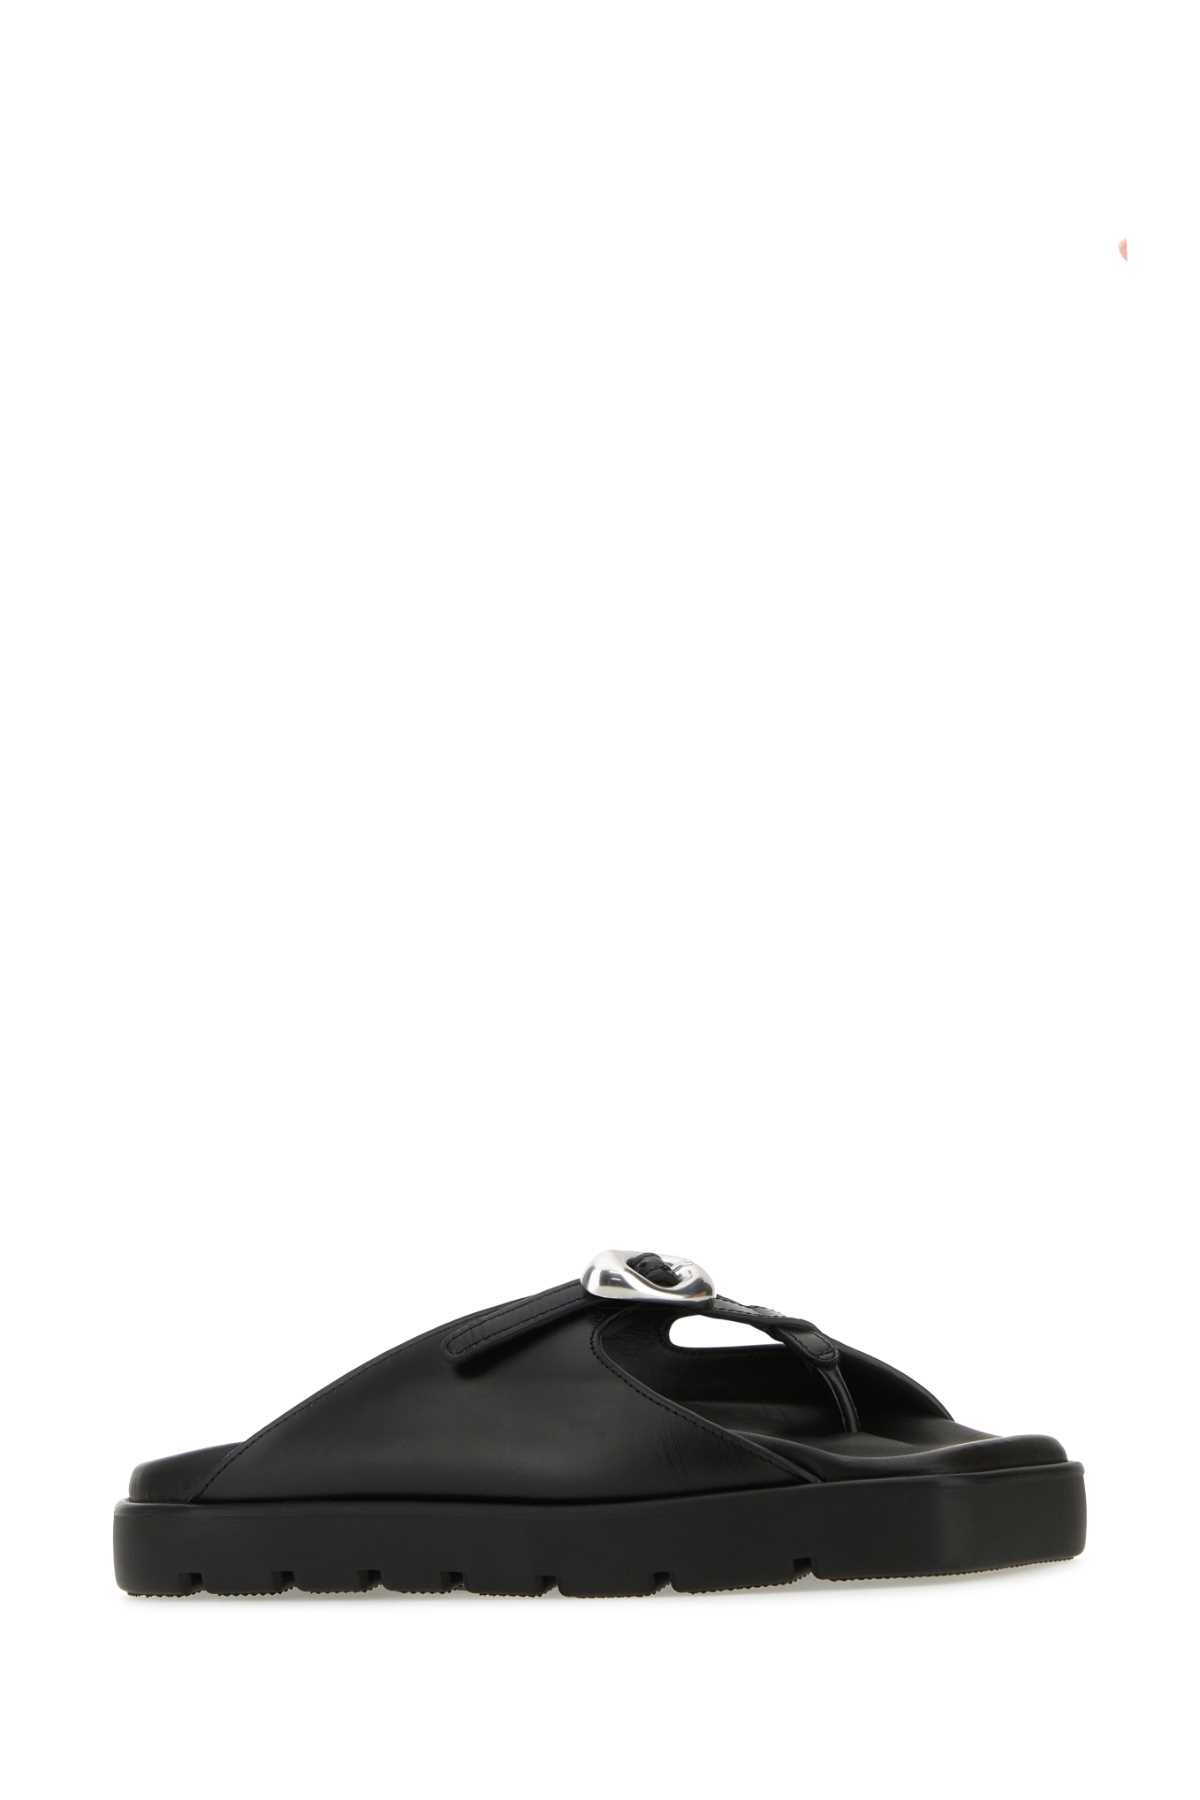 Shop Alexander Wang Black Leather Dome Thong Slippers